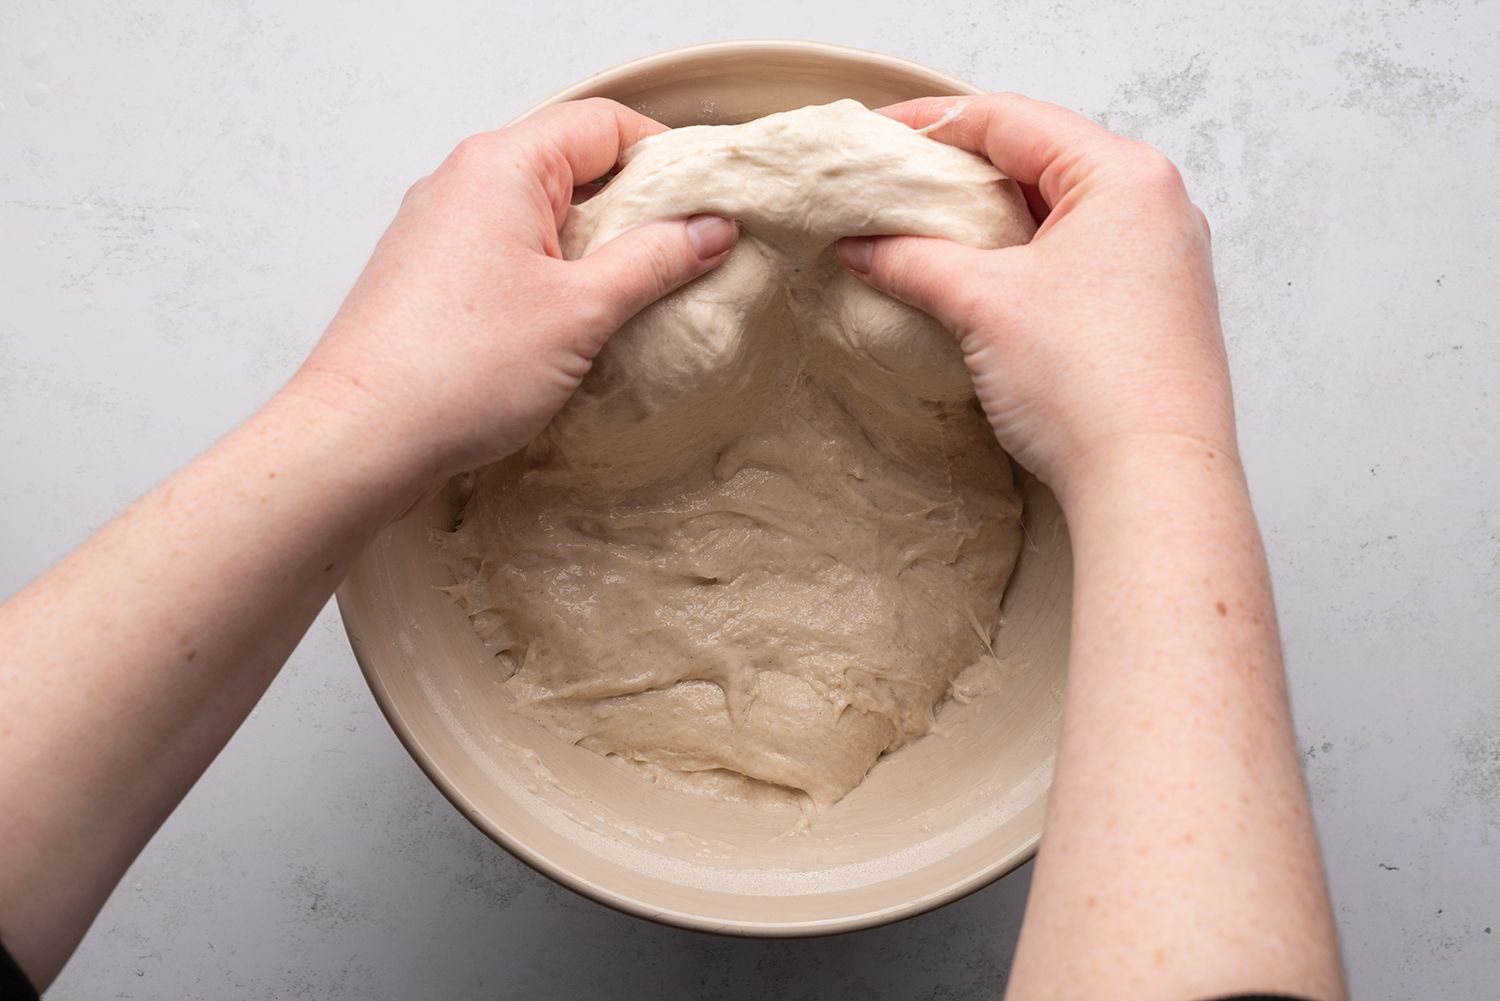 Stretch and fold the dough in the bowl